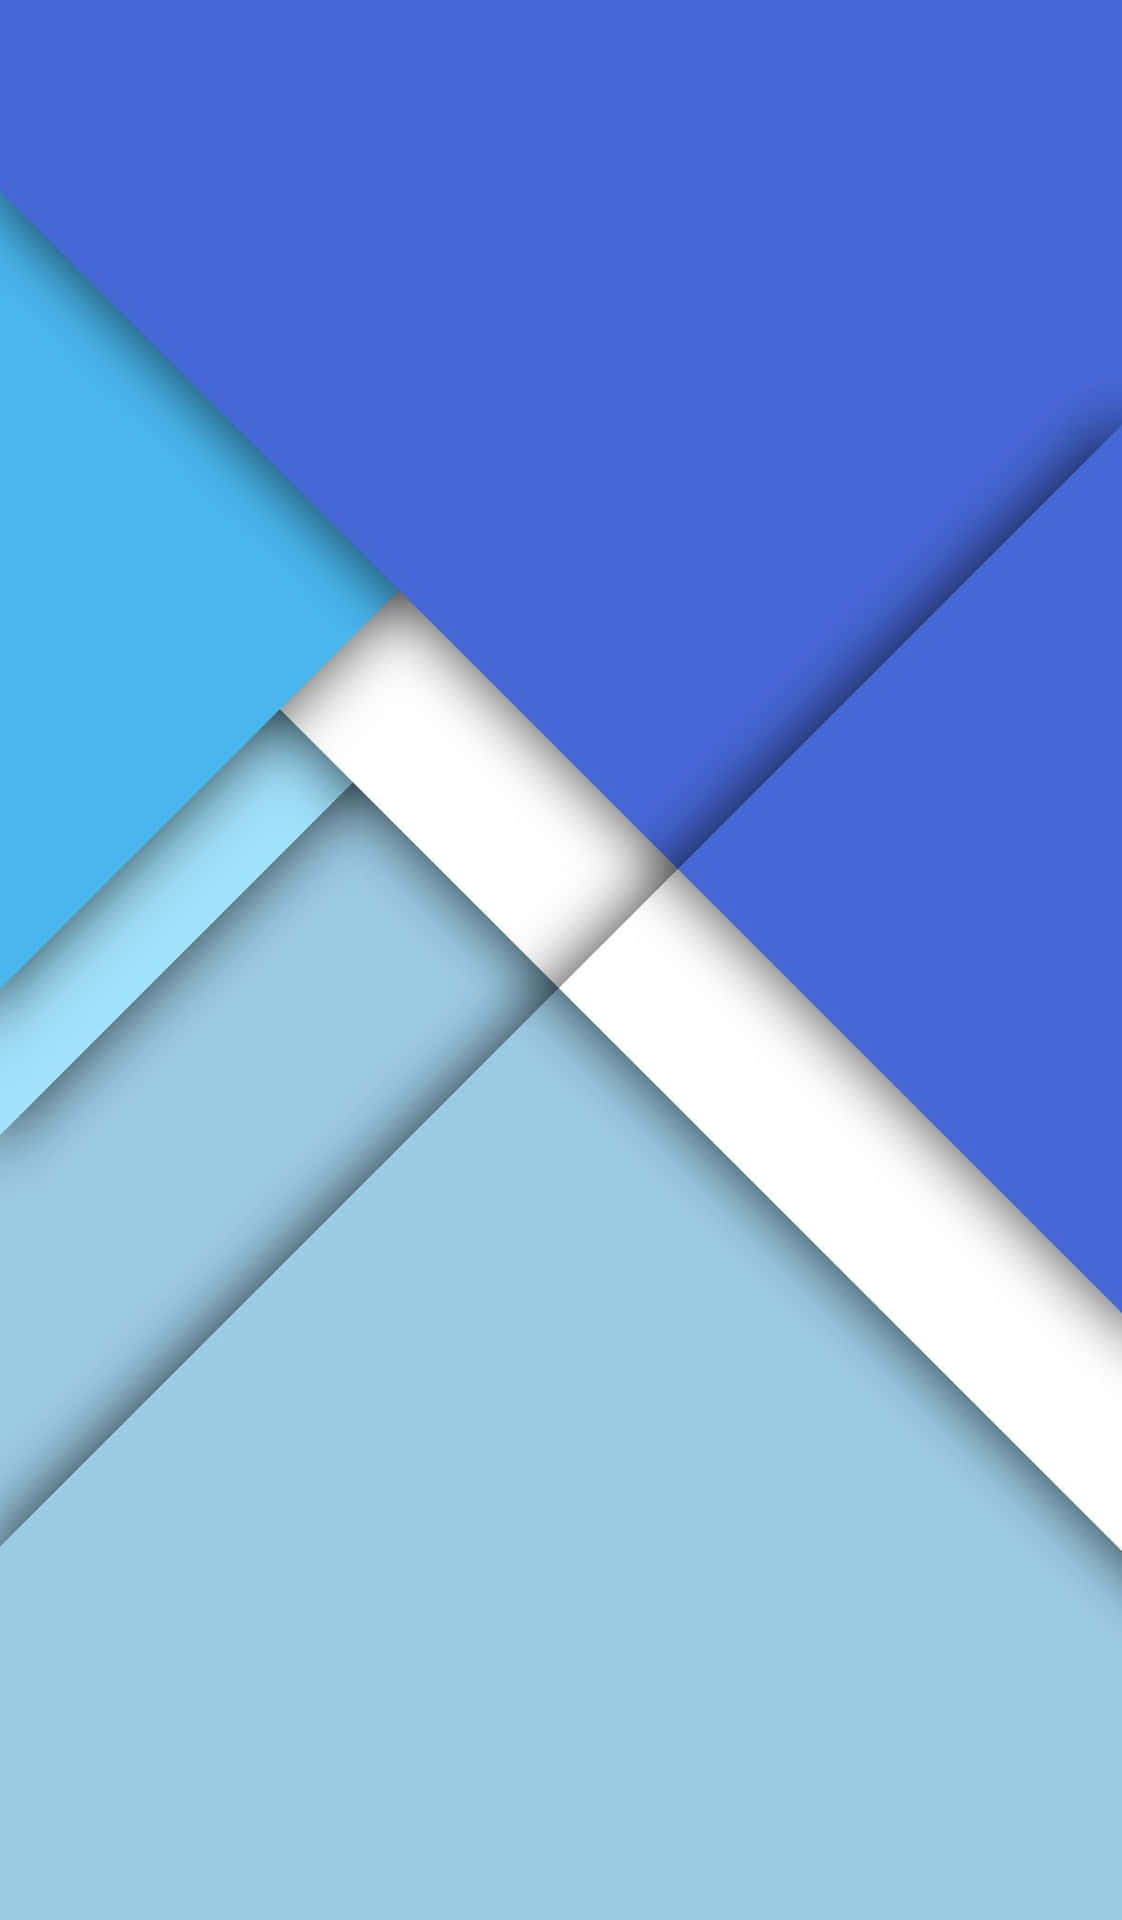 A close-up of textured material using the Material Design guidelines. Wallpaper